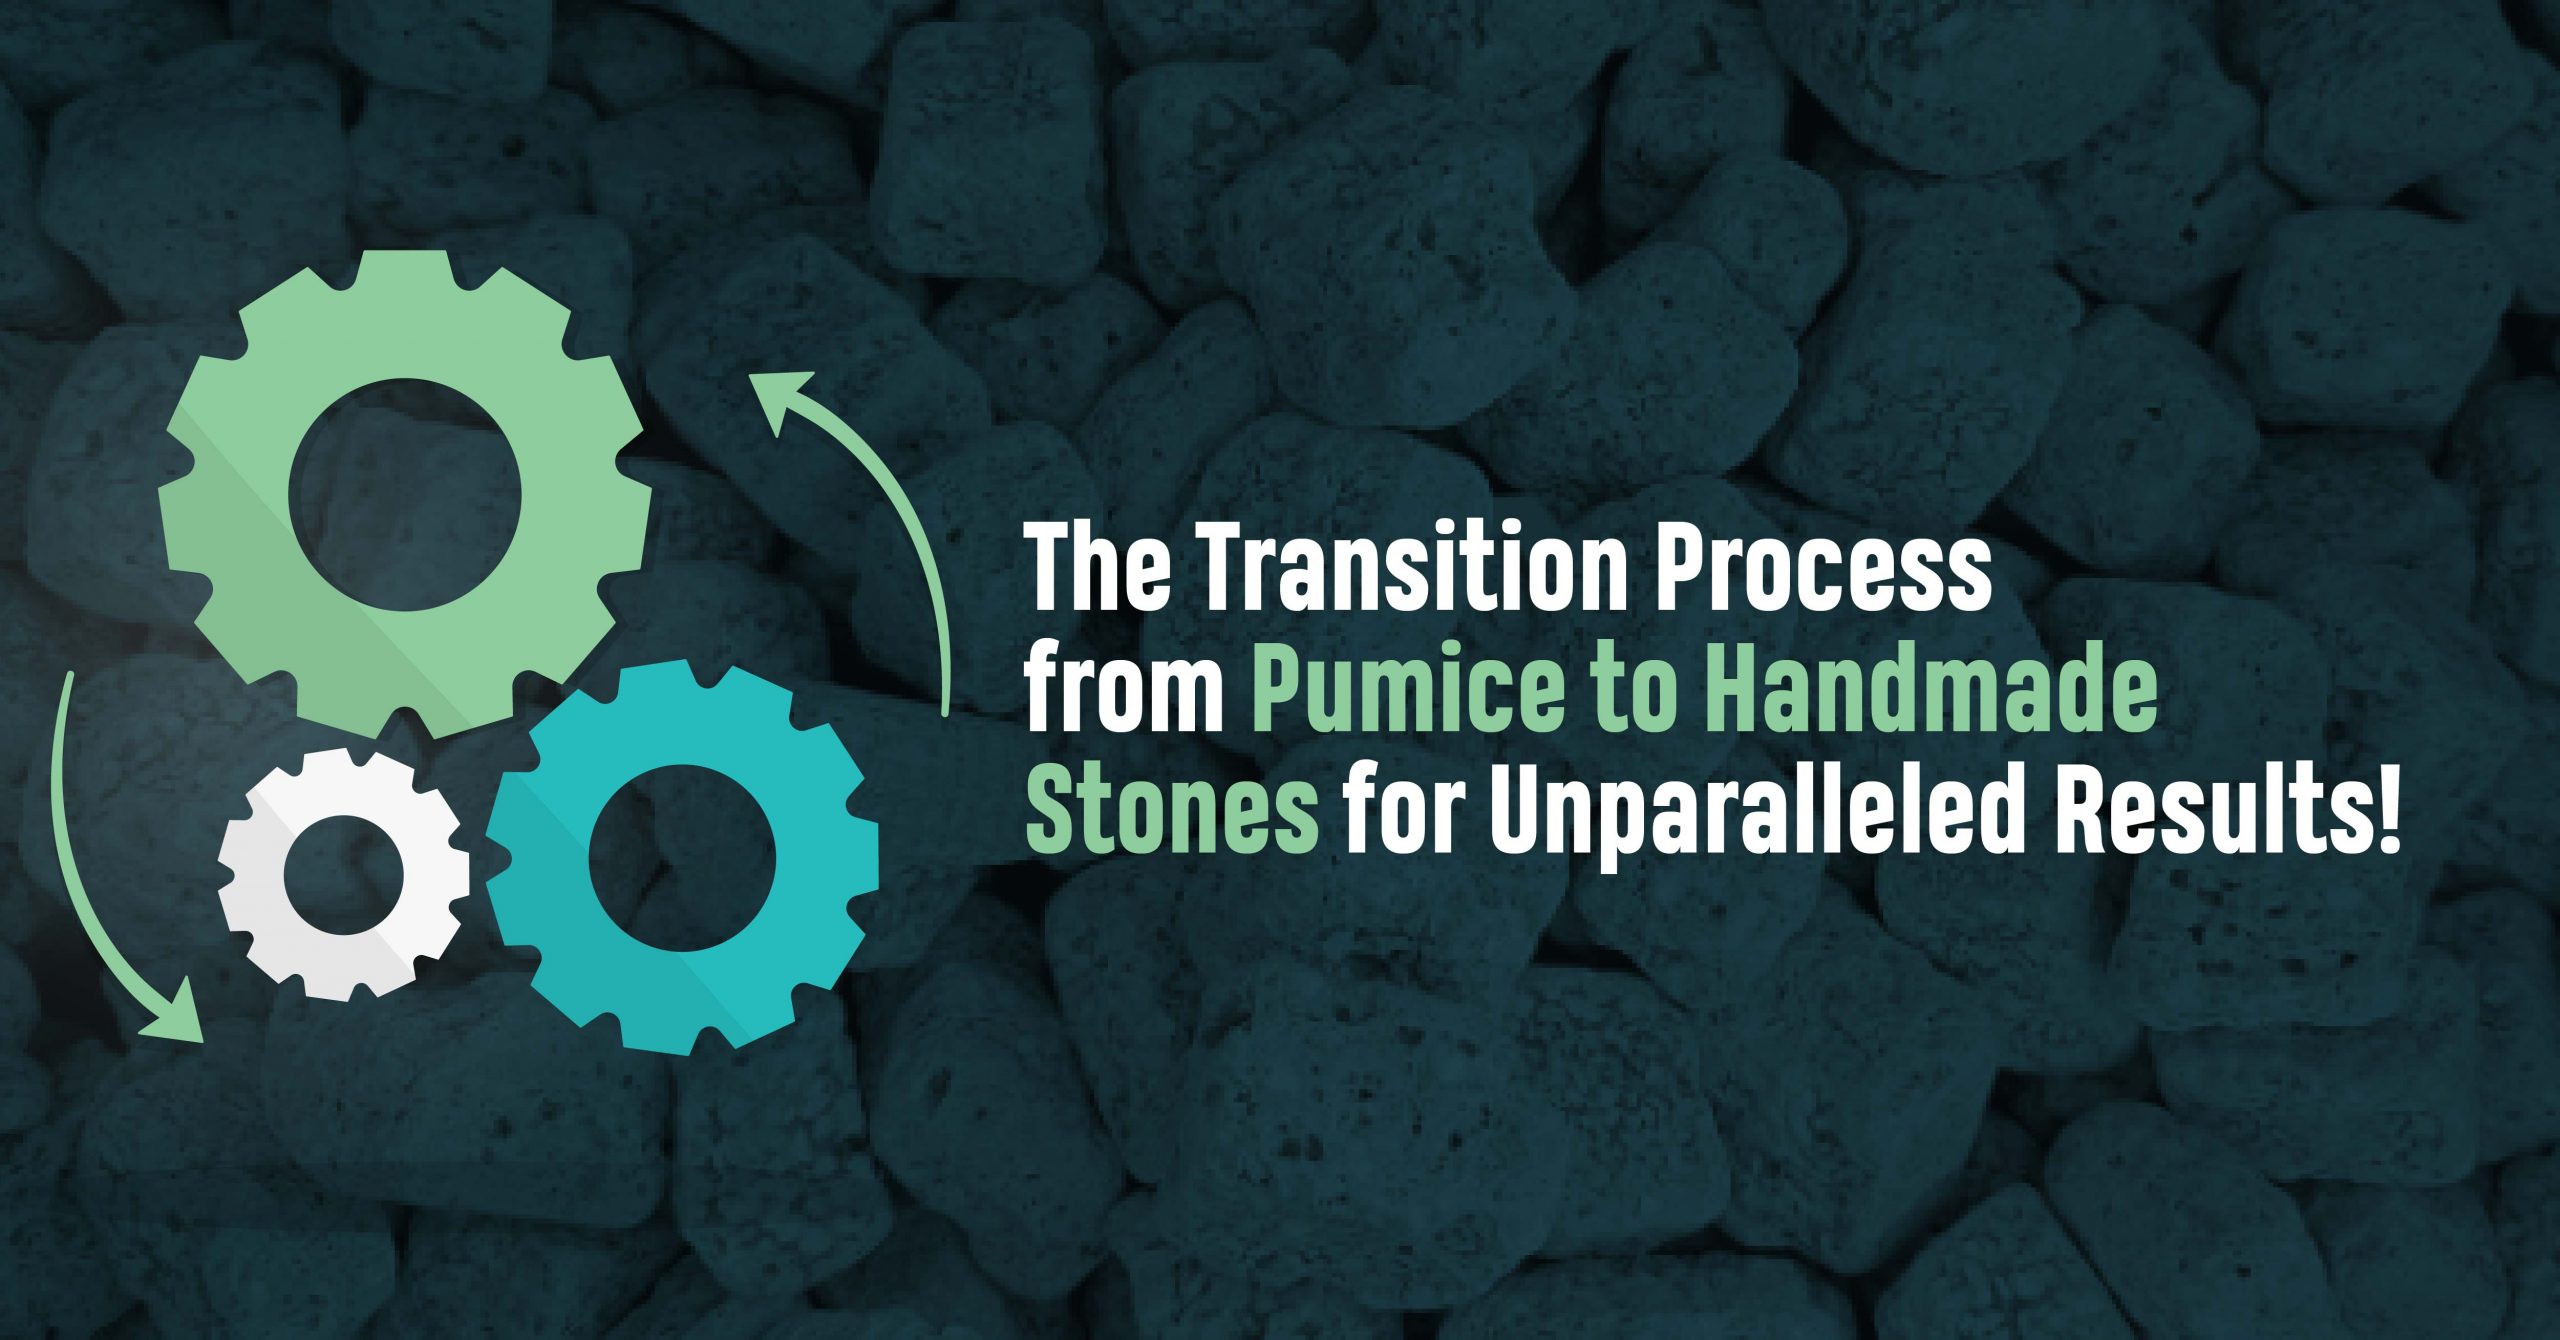 The Transition Process from Pumice to Handmade Stones for Unparalleled Results!